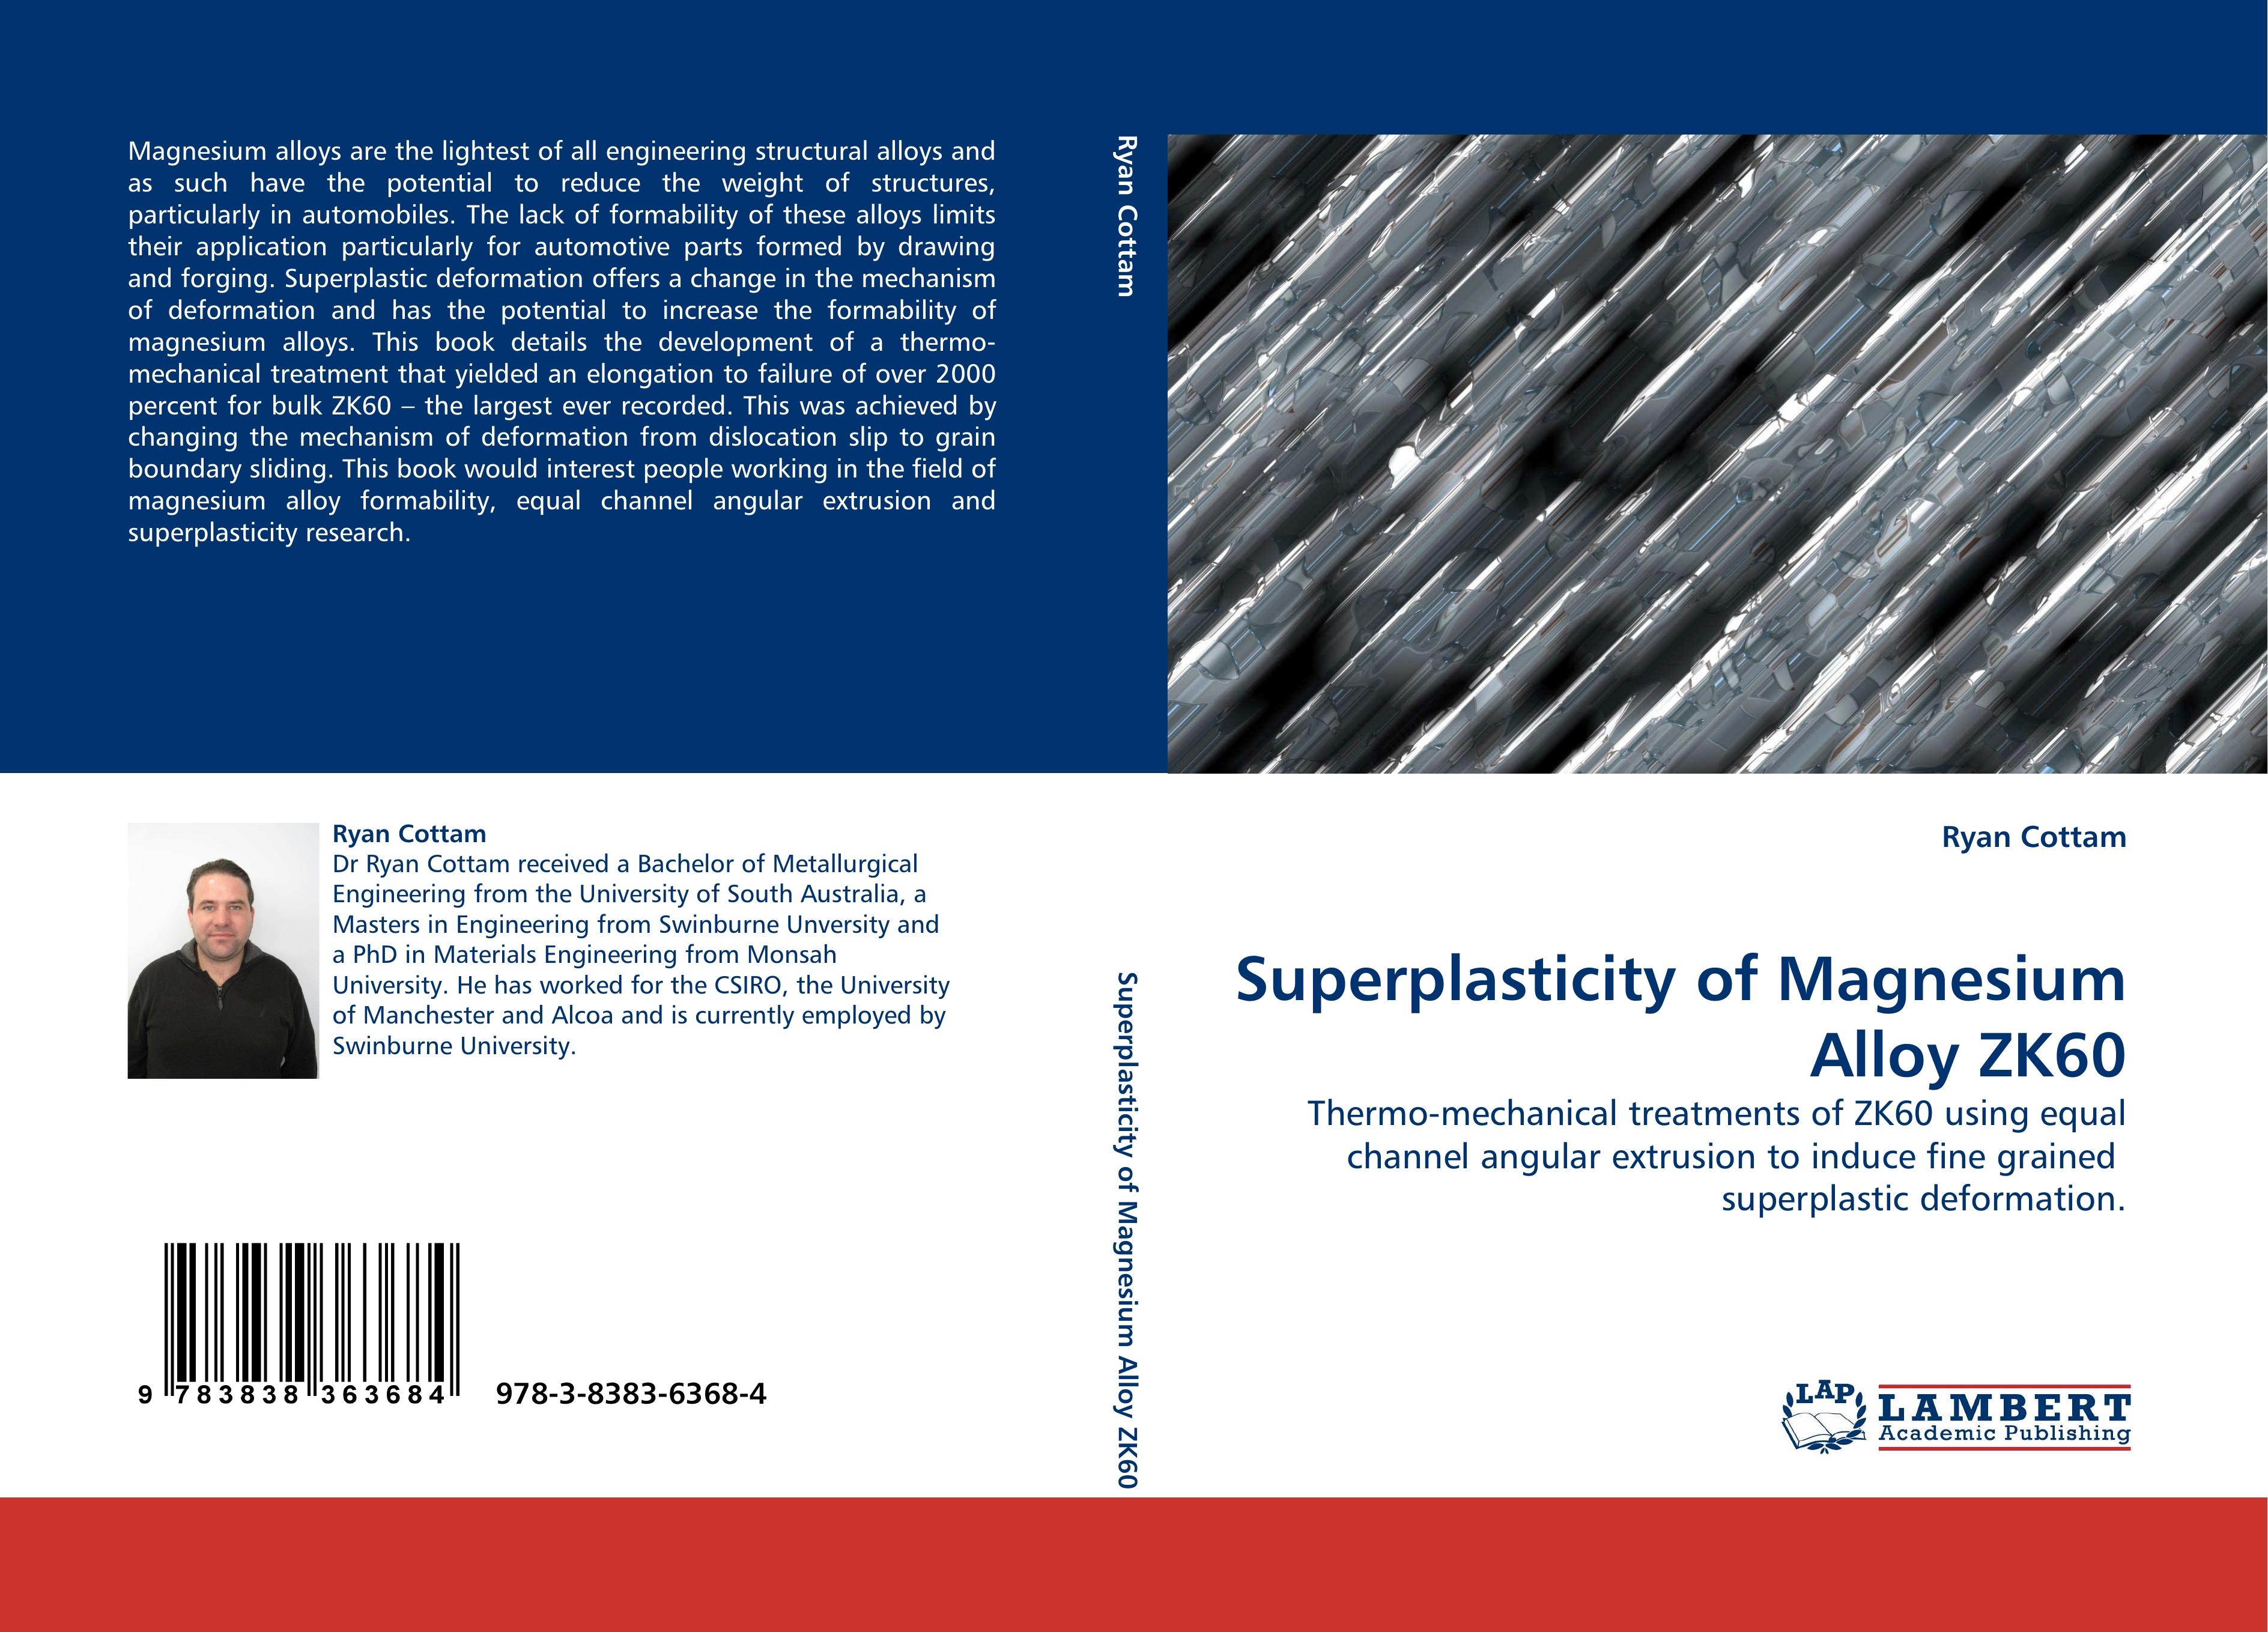 Superplasticity of Magnesium Alloy ZK60 / Thermo-mechanical treatments of ZK60 using equal channel angular extrusion to induce fine grained superplastic deformation. / Ryan Cottam / Taschenbuch / 2010 - Cottam, Ryan